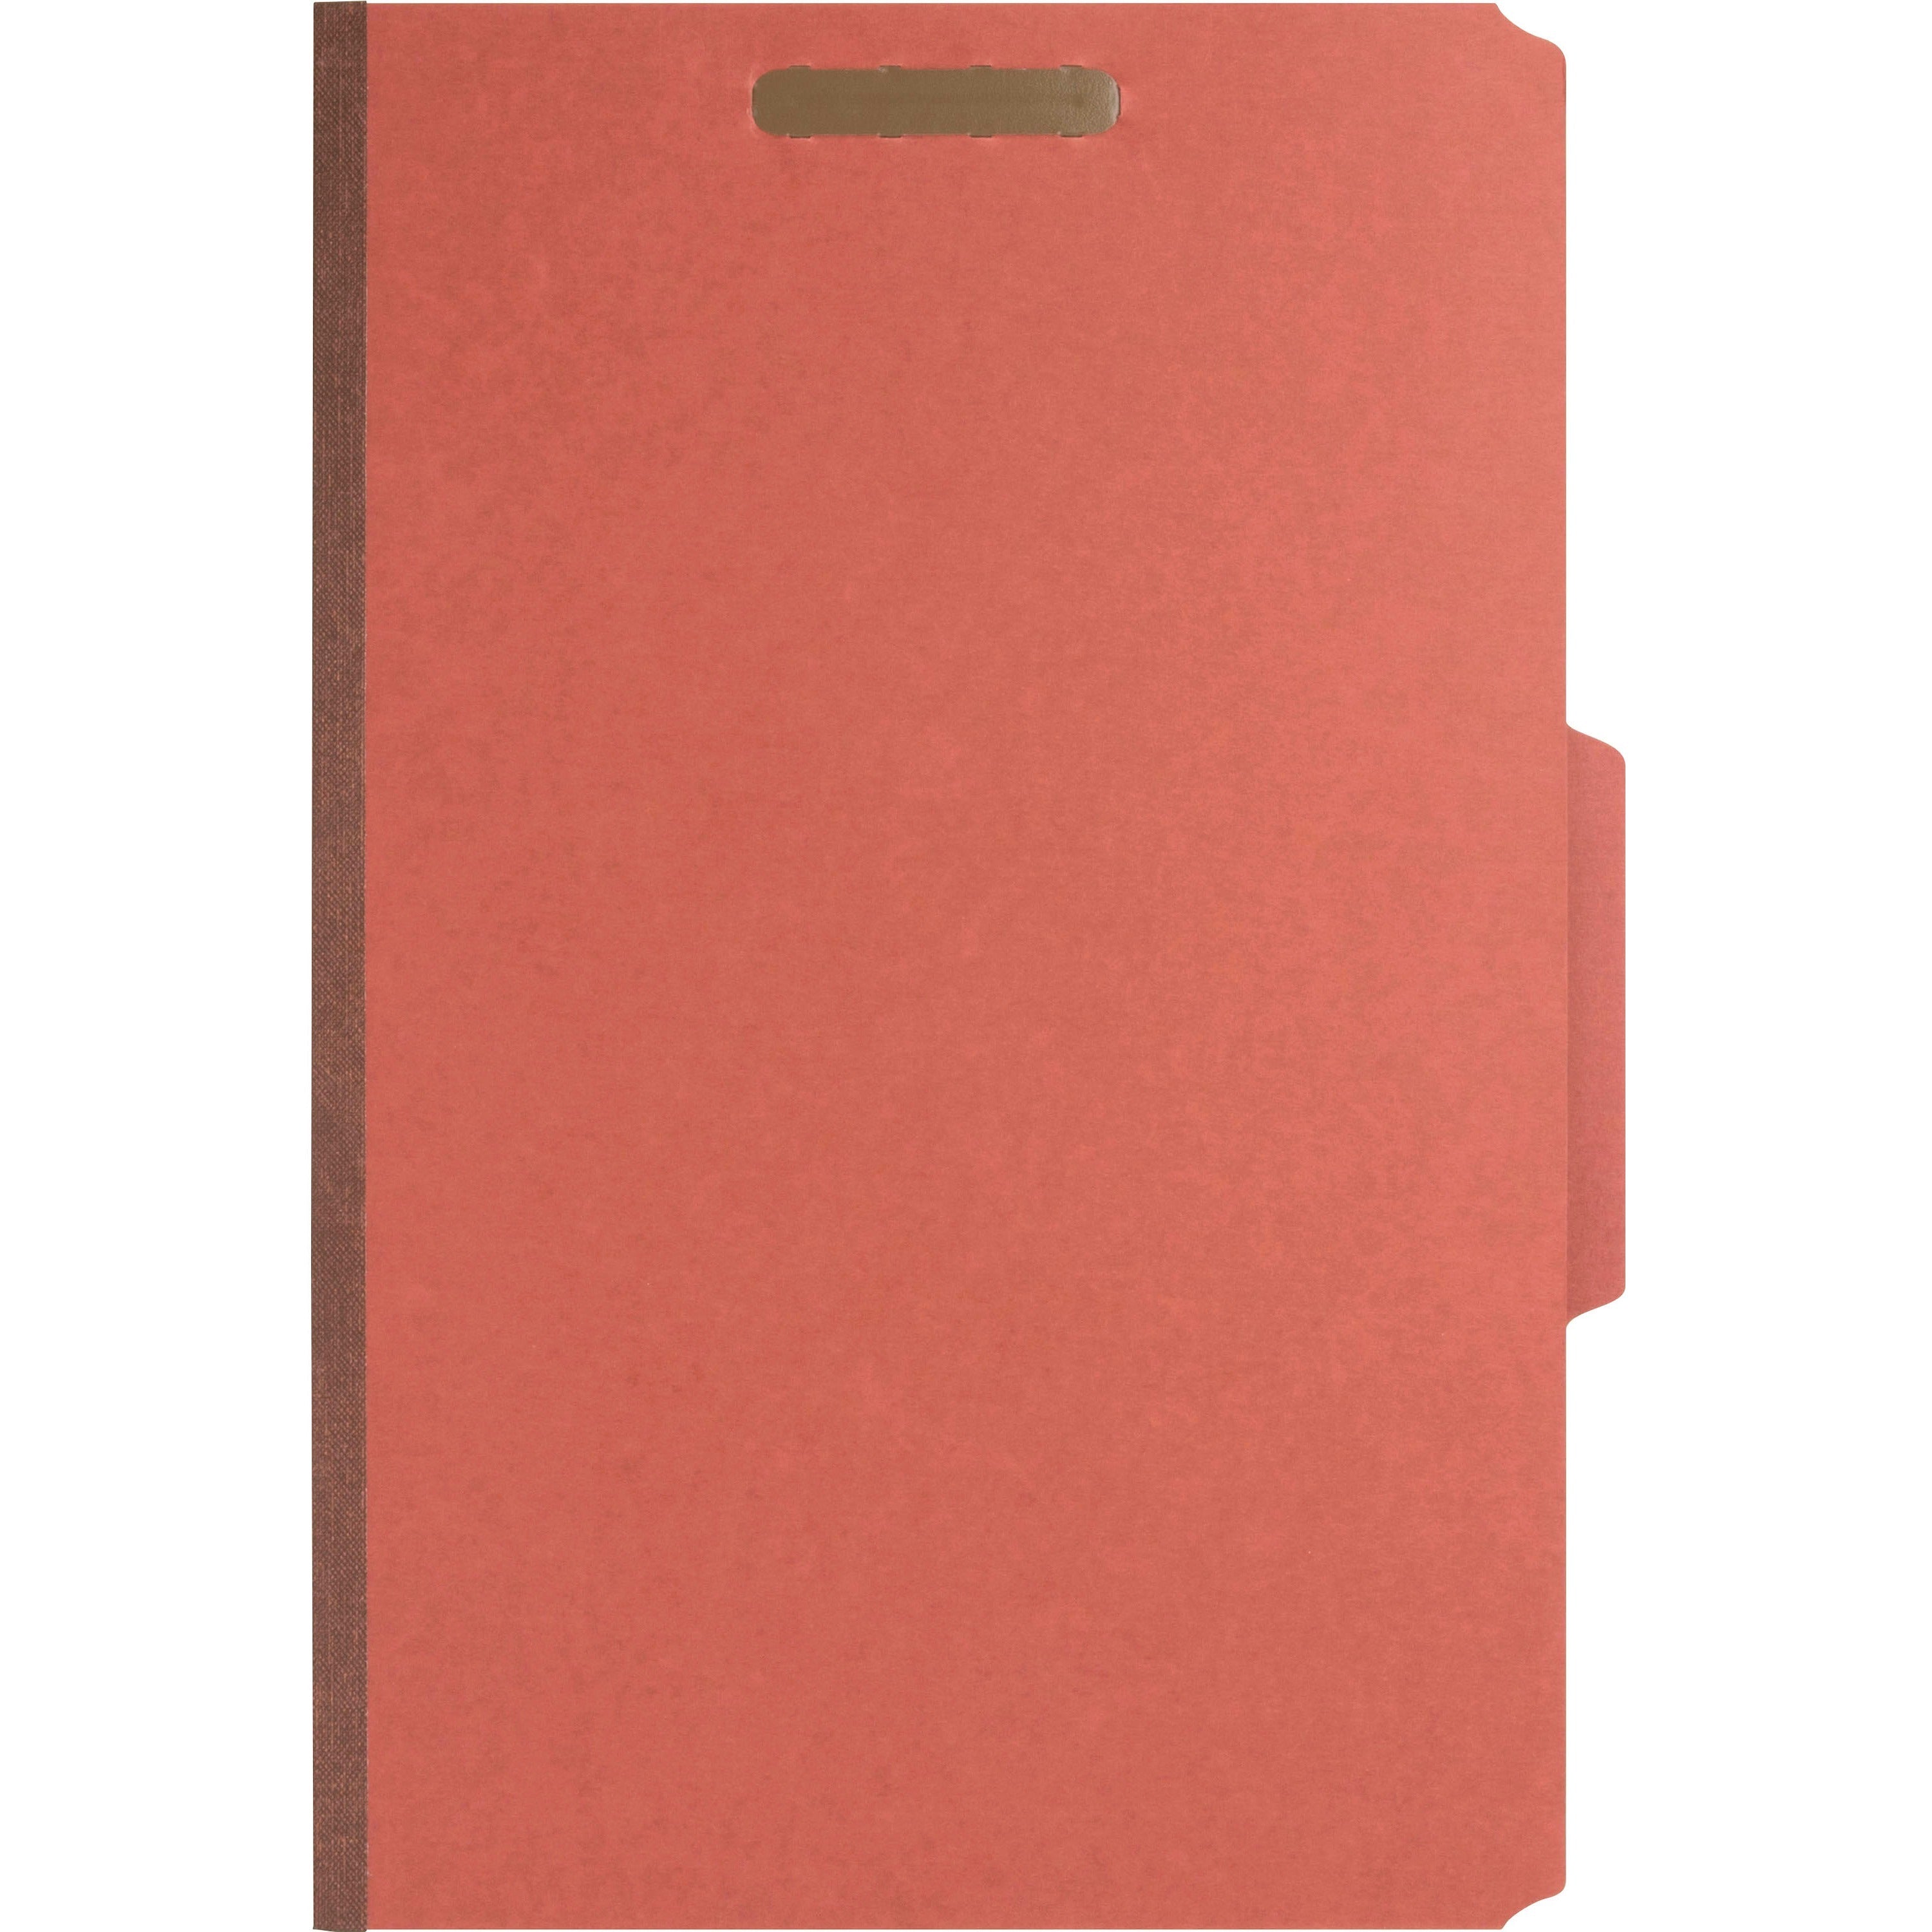 Nature Saver 2/5 Tab Cut Legal Recycled Classification Folder - 8 1/2" x 14" - 6 Fastener(s) - 2" Fastener Capacity for Folder, 1" Fastener Capacity for Divider - 2 Divider(s) - Pressboard - Red - 100% Recycled - 10 / Box - 